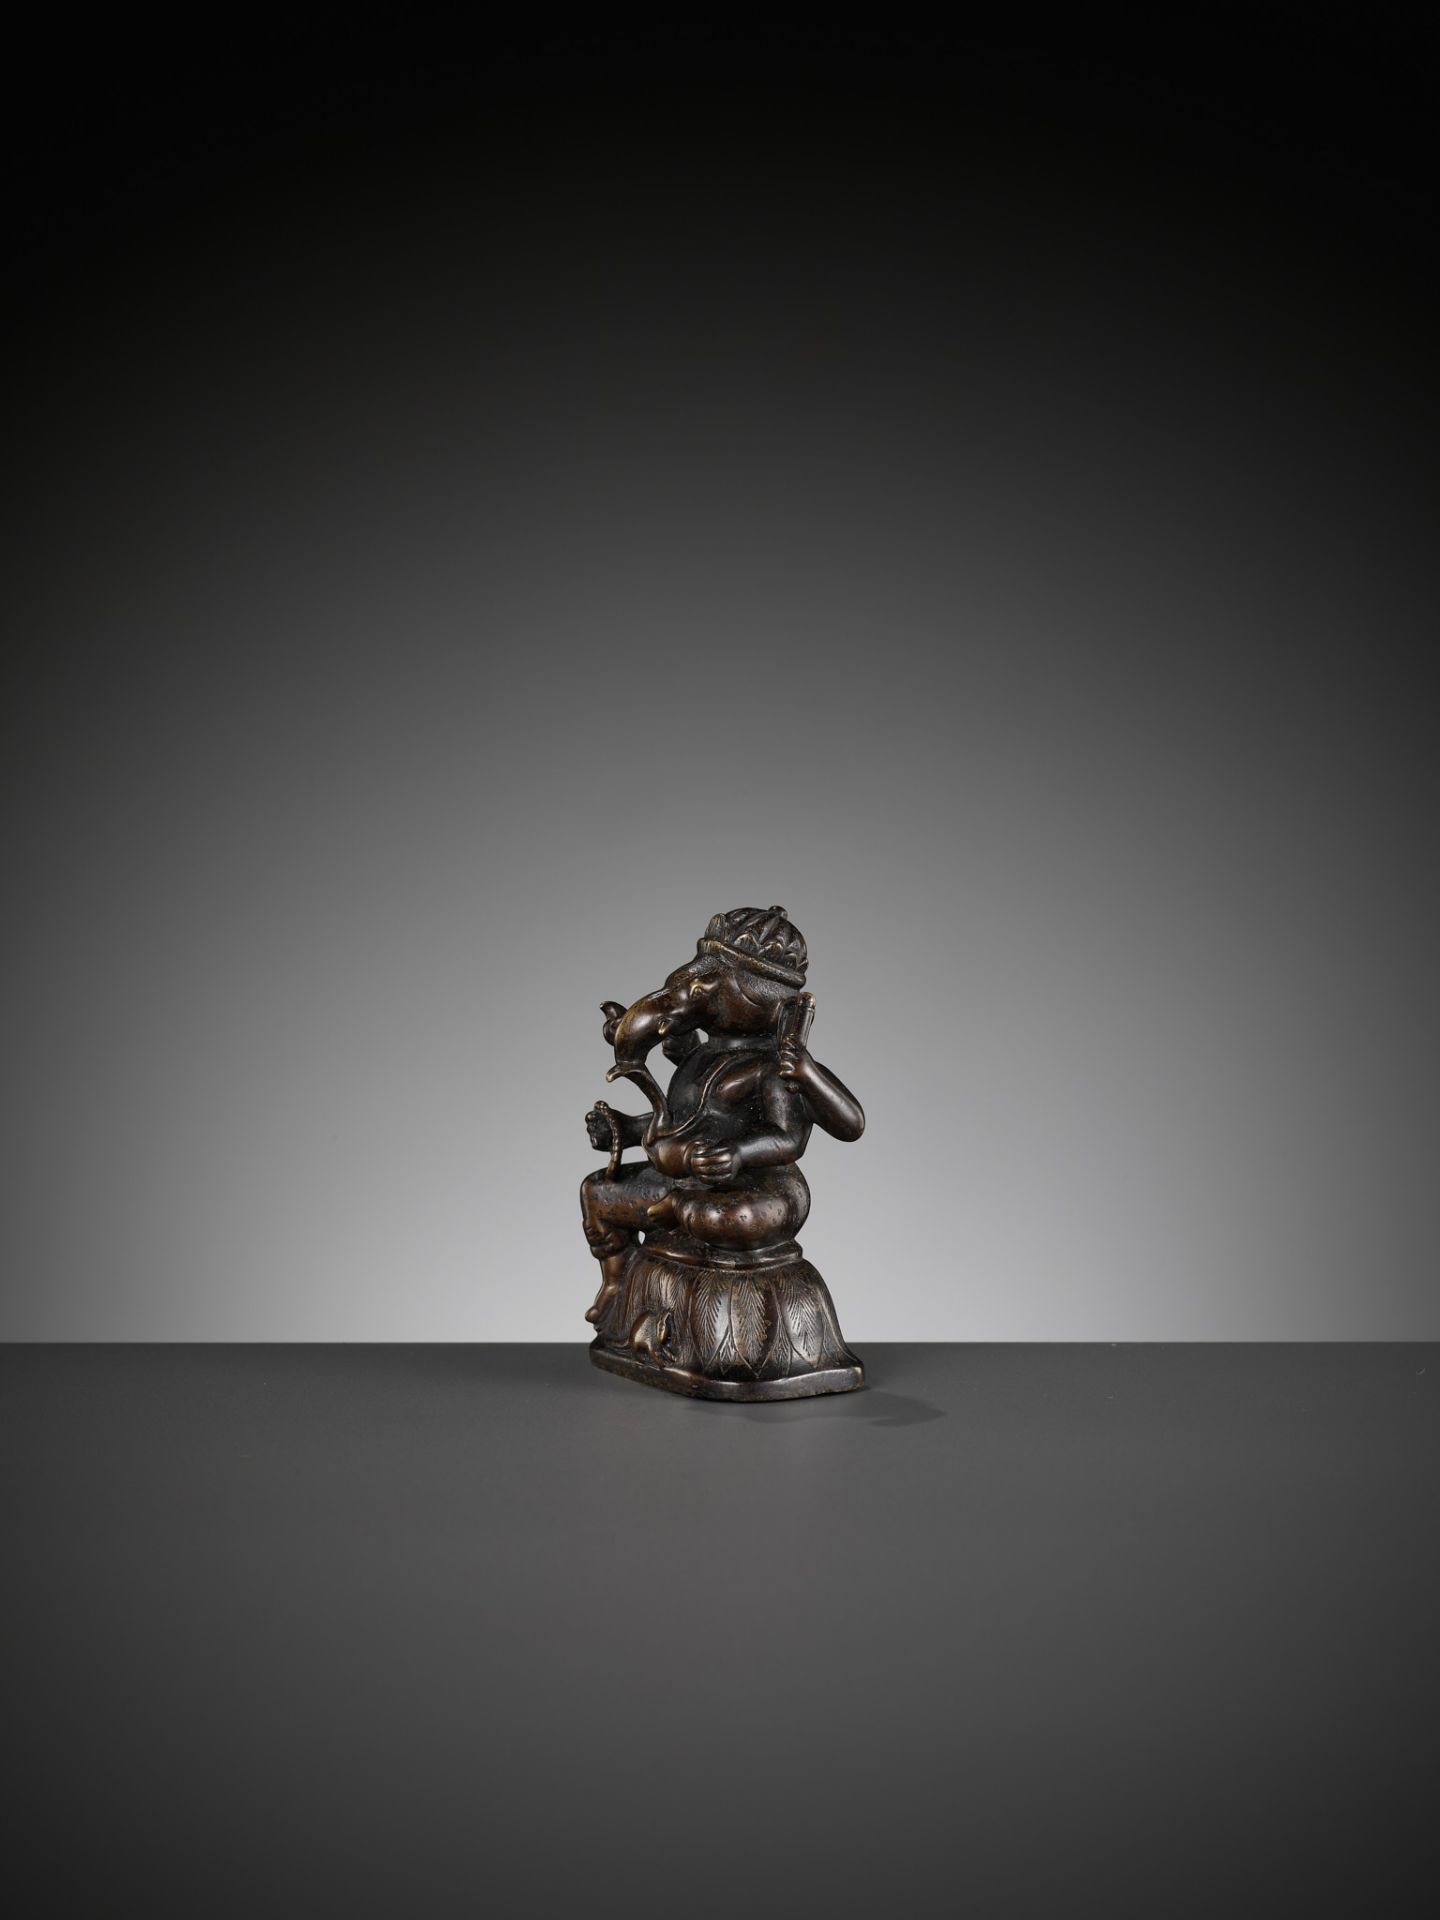 A SMALL BRONZE FIGURE OF GANESHA, SOUTH INDIA, 17TH - 18TH CENTURY - Image 9 of 14